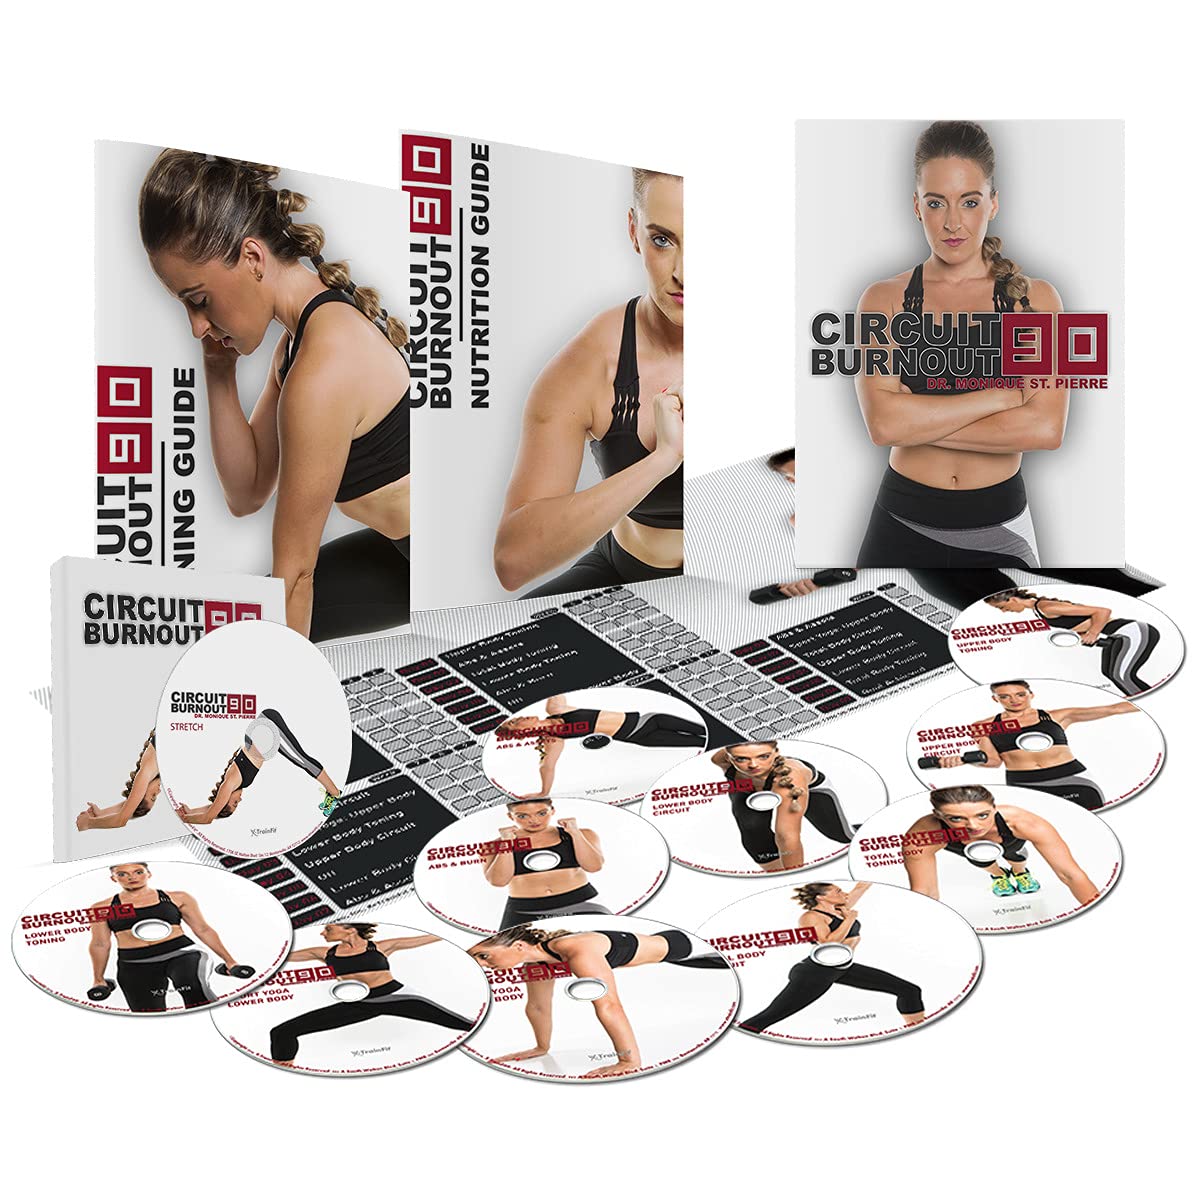 Circuit Burnout 90: 90 Day DVD Workout Program with 10+1 Exercise Videos + Training Calendar, Fitness Tracker &Training Guide and Nutrition Plan